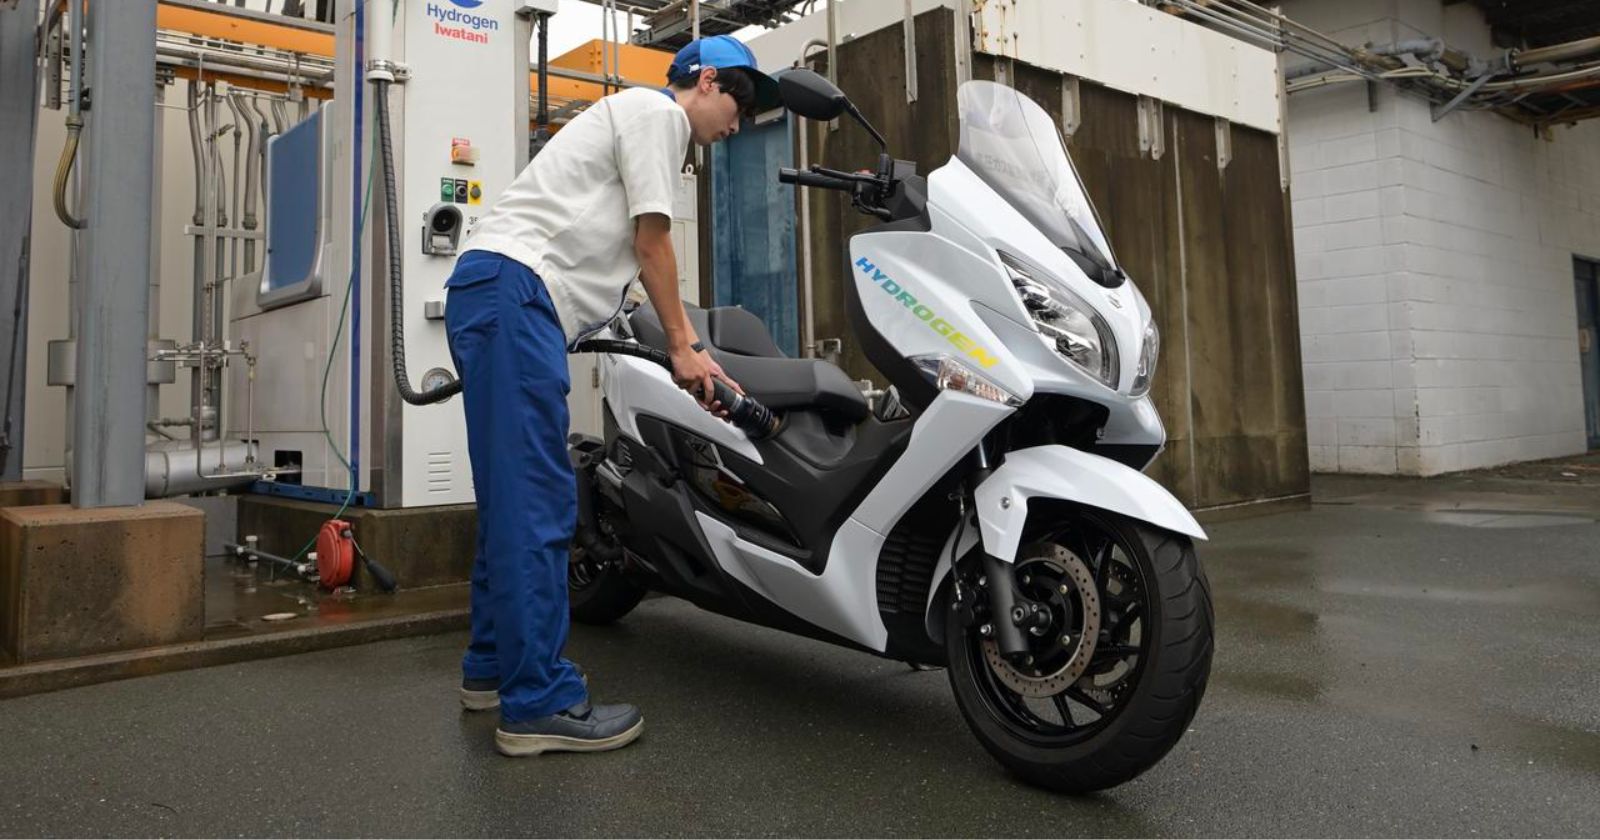 2023 Japan Mobility Show - Suzuki Burgman Hydrogen & Electric Scooters To  Be Showcased